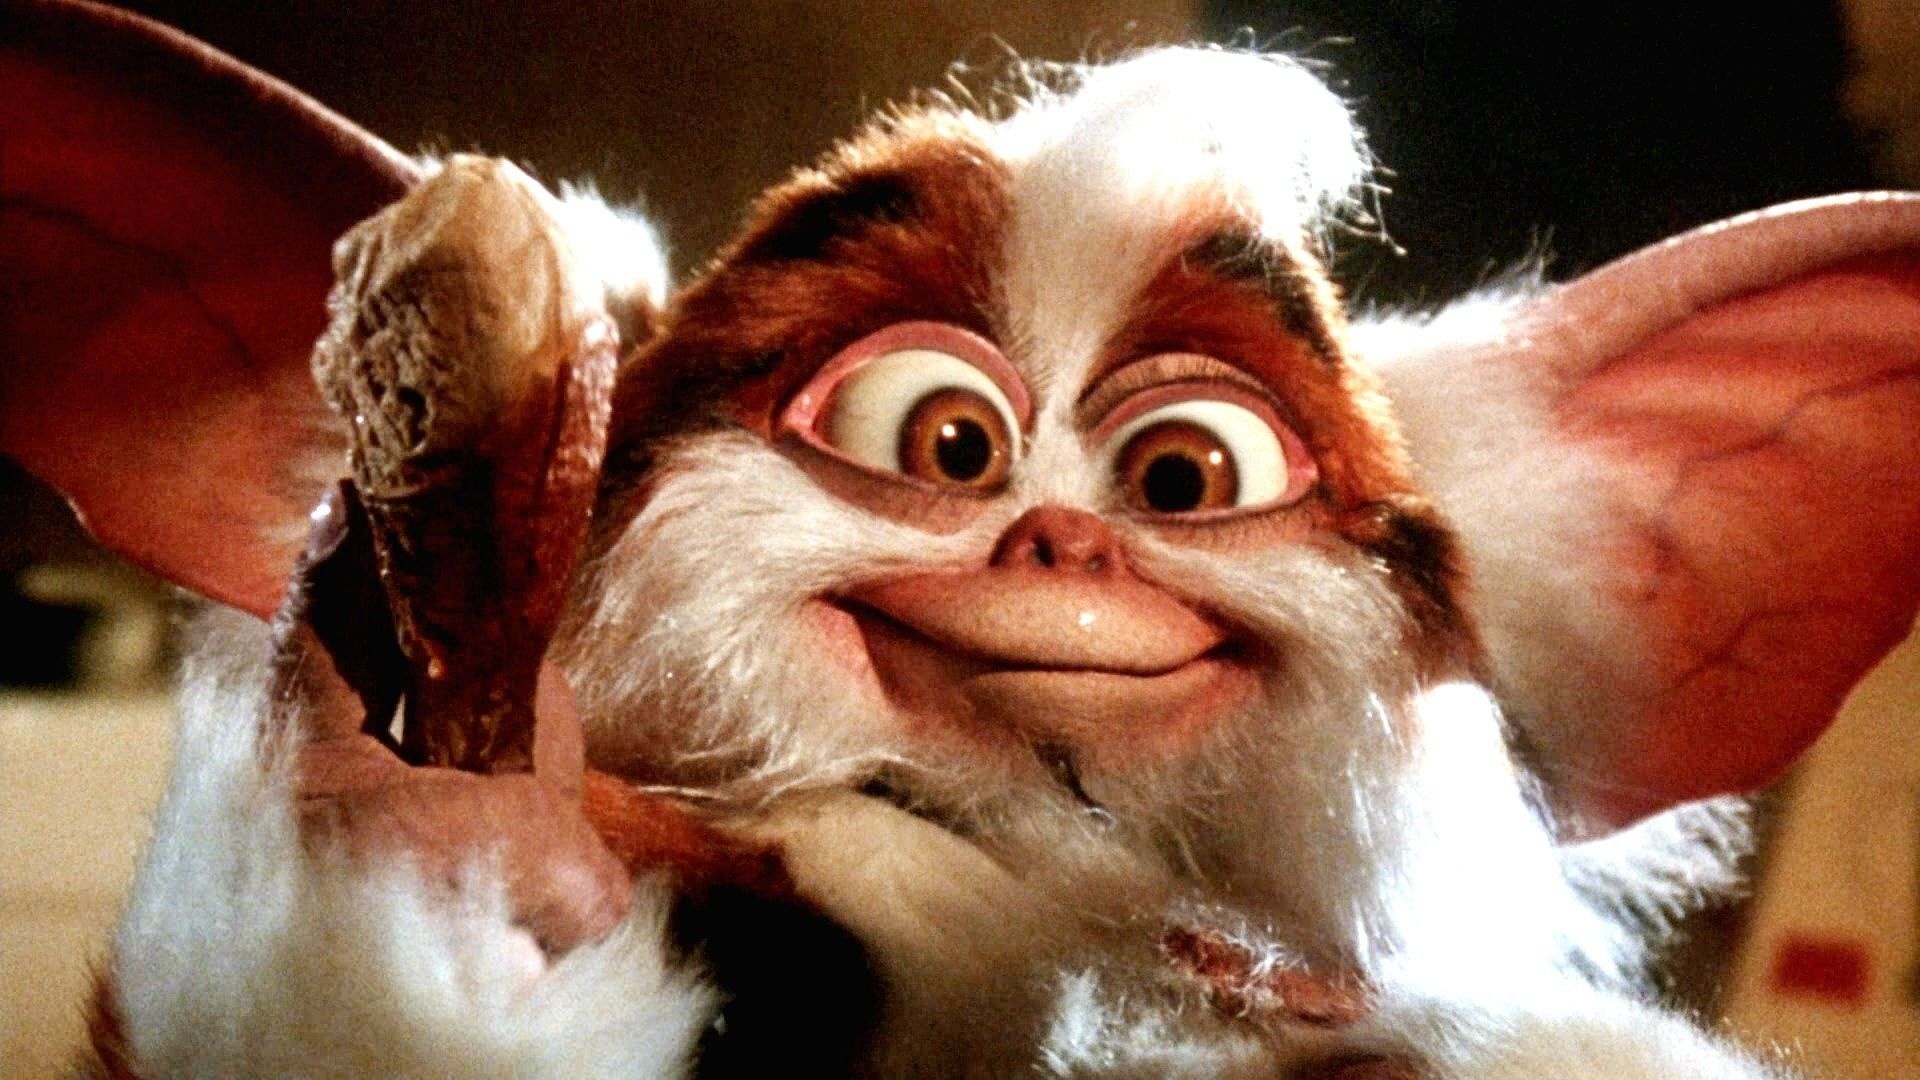 Gremlin Gizmo: Originally owned by Mr. Wing, Giz lives with Billy and Kate Peltzer in New York. 1920x1080 Full HD Wallpaper.